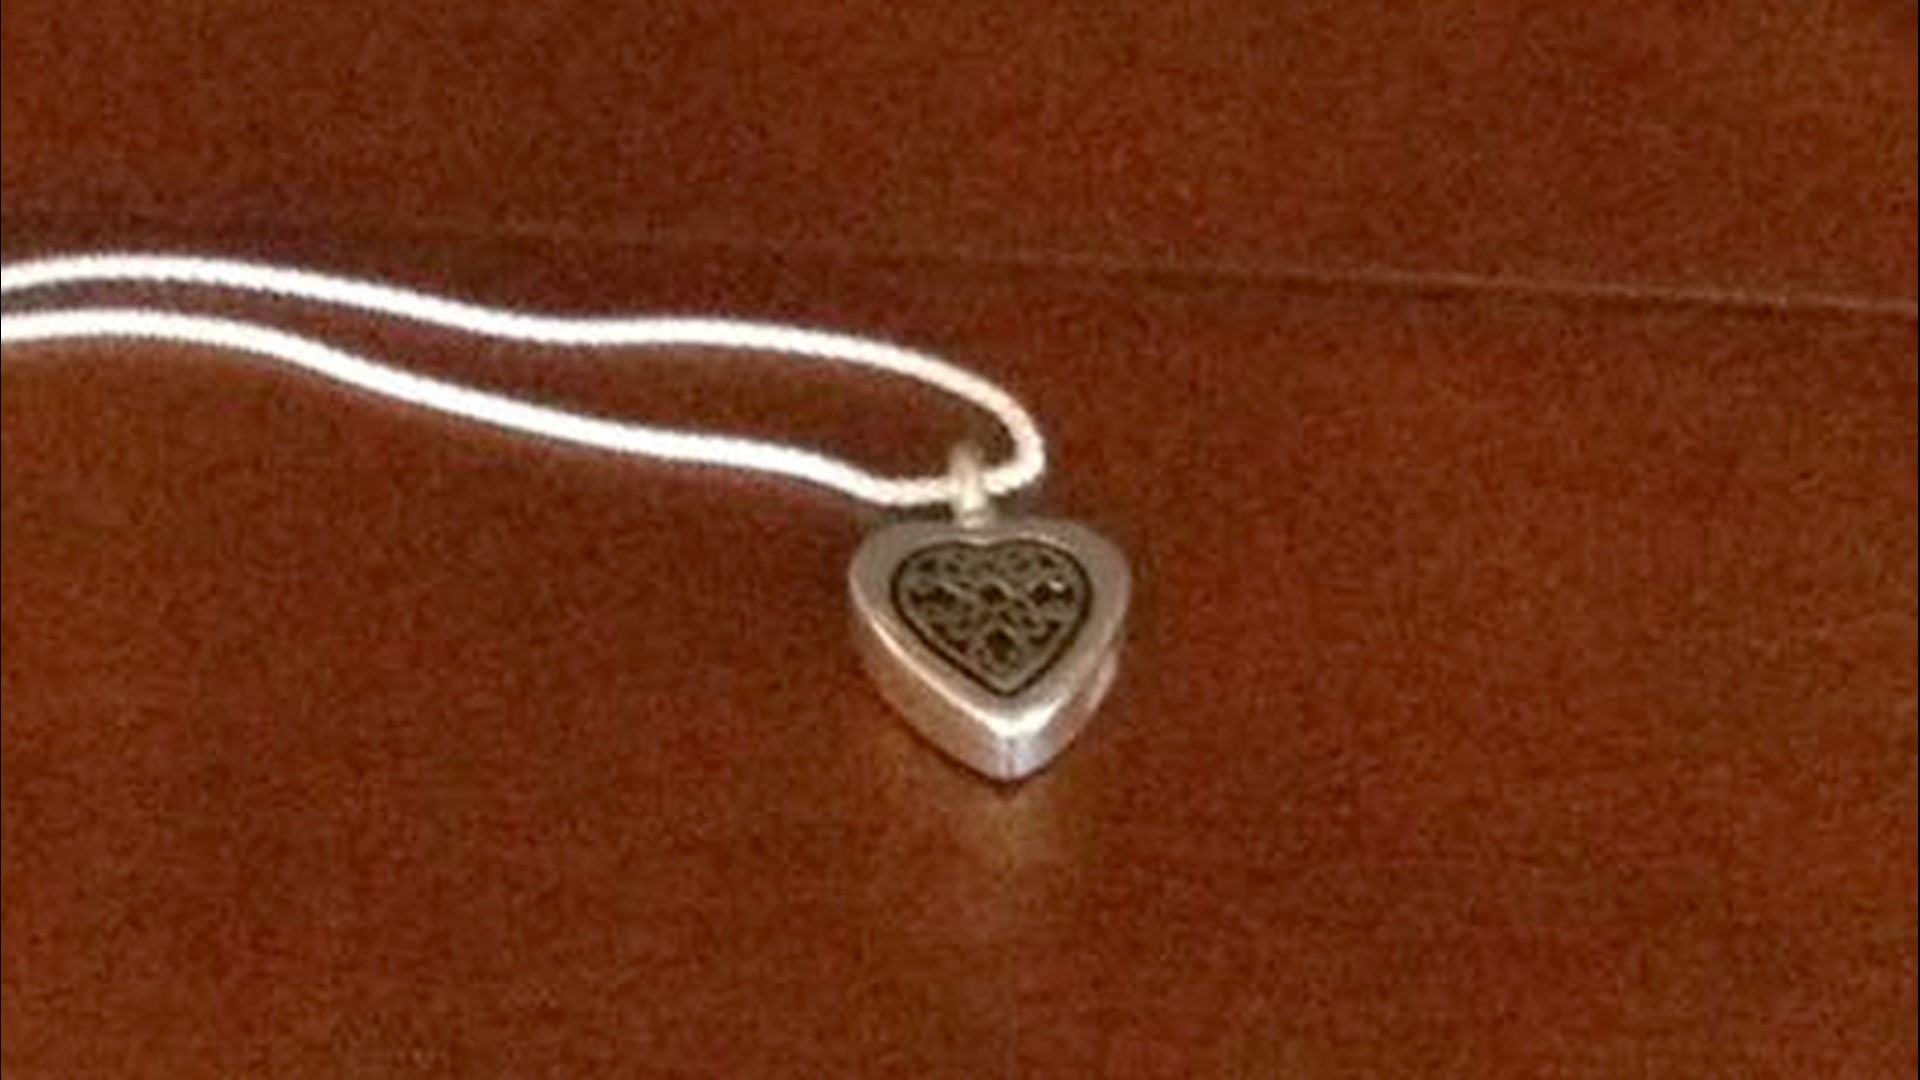 Missing Necklace Containing Son's Ashes Has Been Found